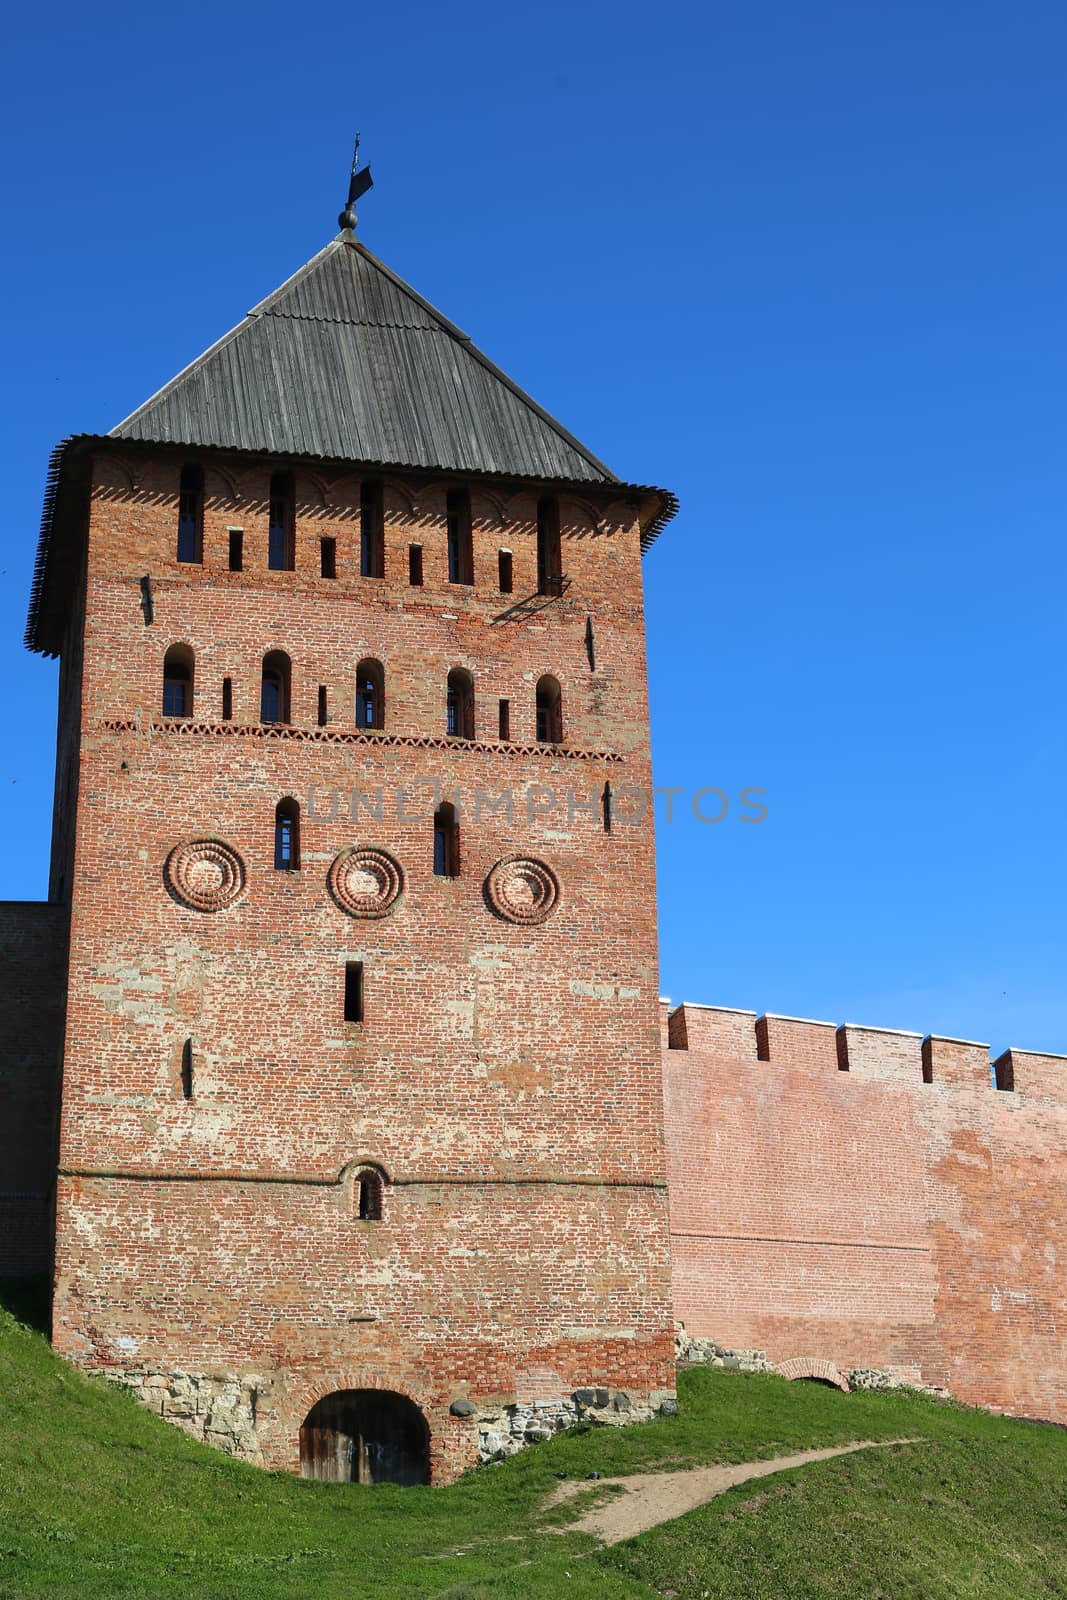 Towers of Veliky Novgorod Kremlin fortress at sunny summer day, Russia